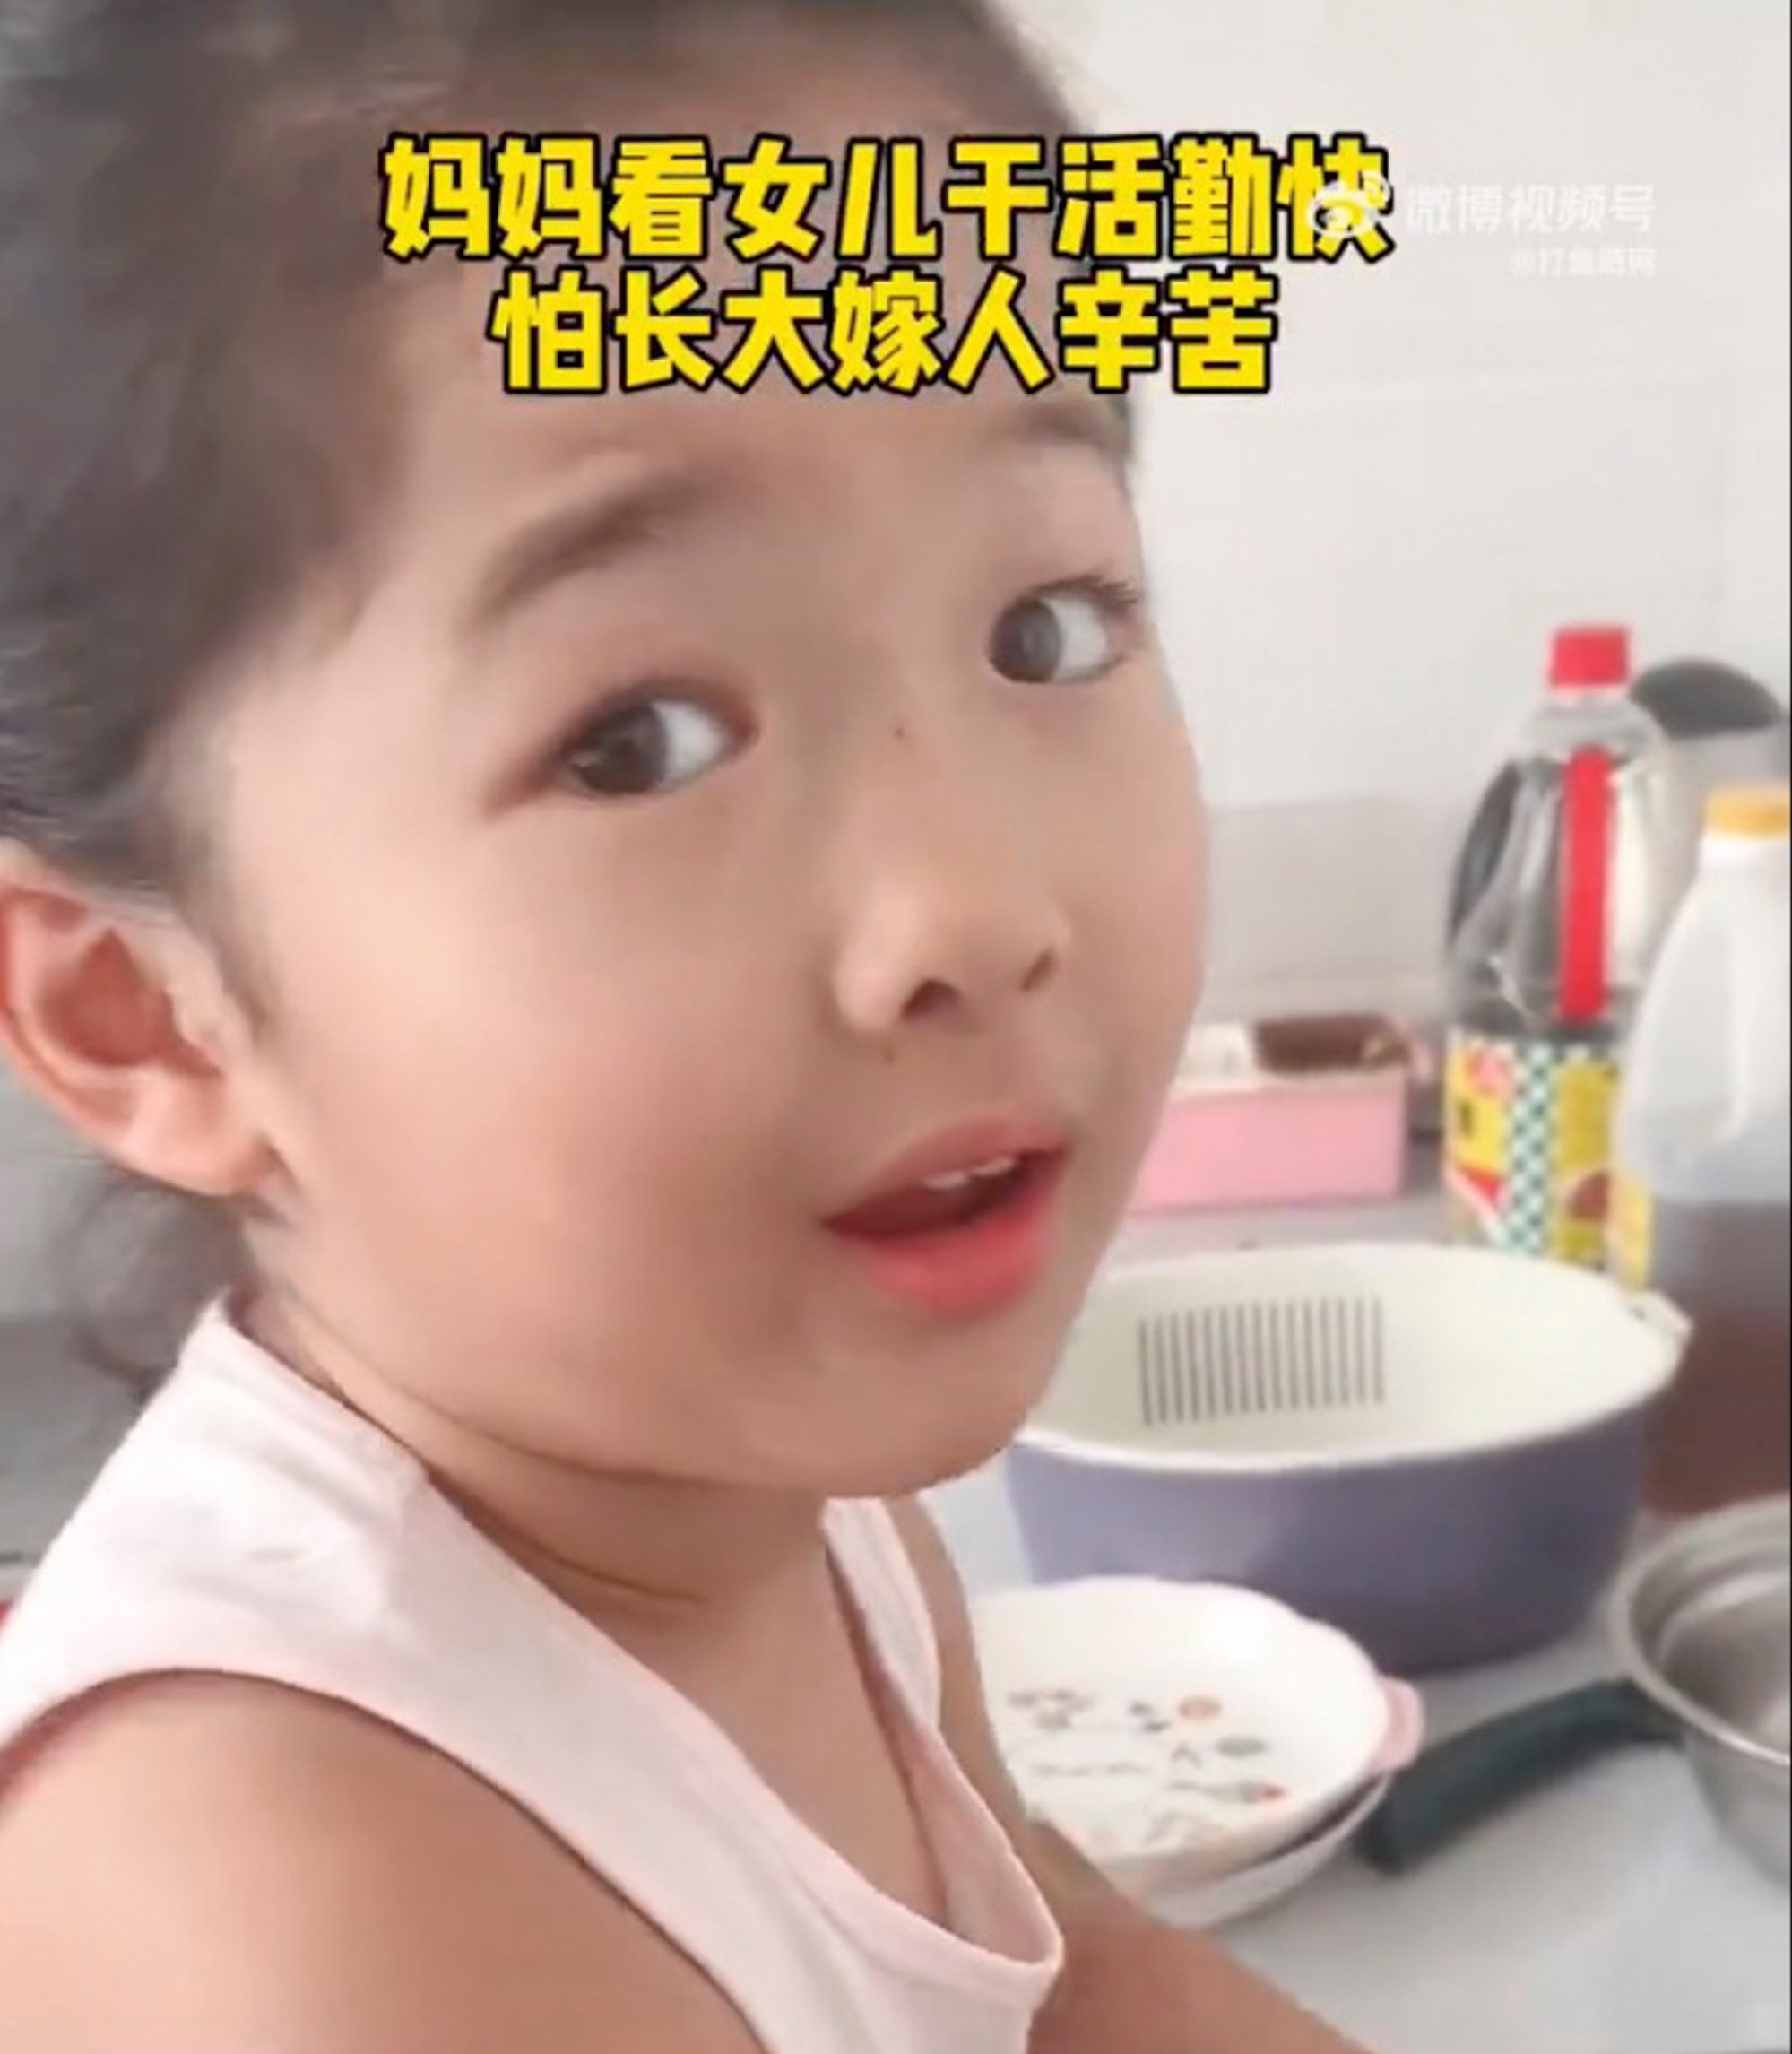 Little Fan said she only did housework for her mother and wanted a husband who would not let her do household chores. Photo: Weibo